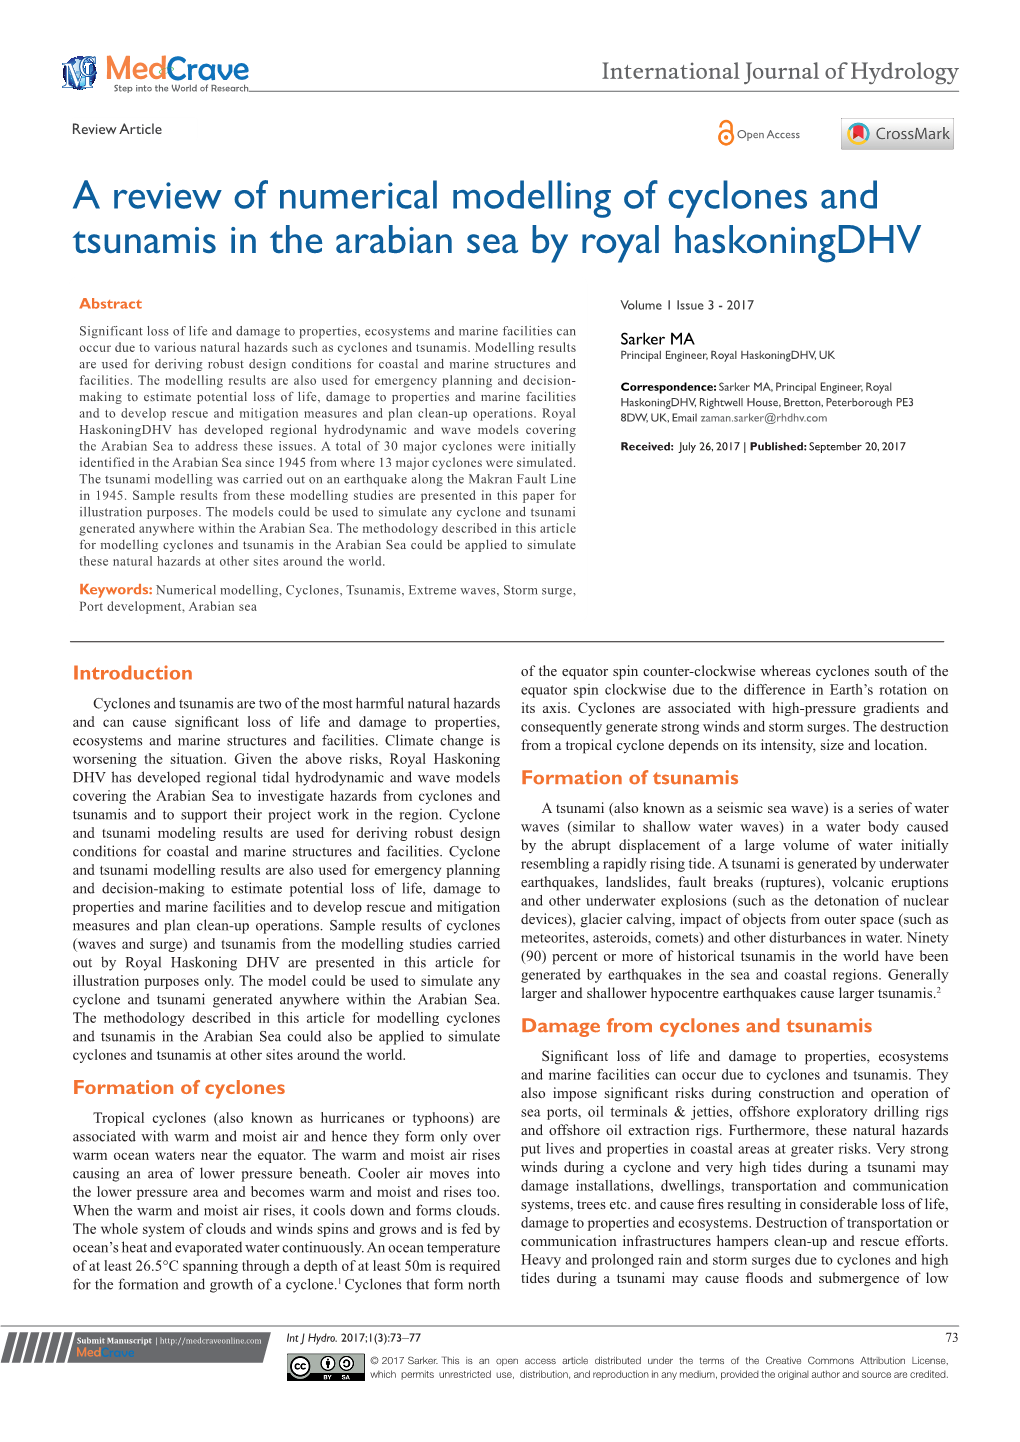 A Review of Numerical Modelling of Cyclones and Tsunamis in the Arabian Sea by Royal Haskoningdhv